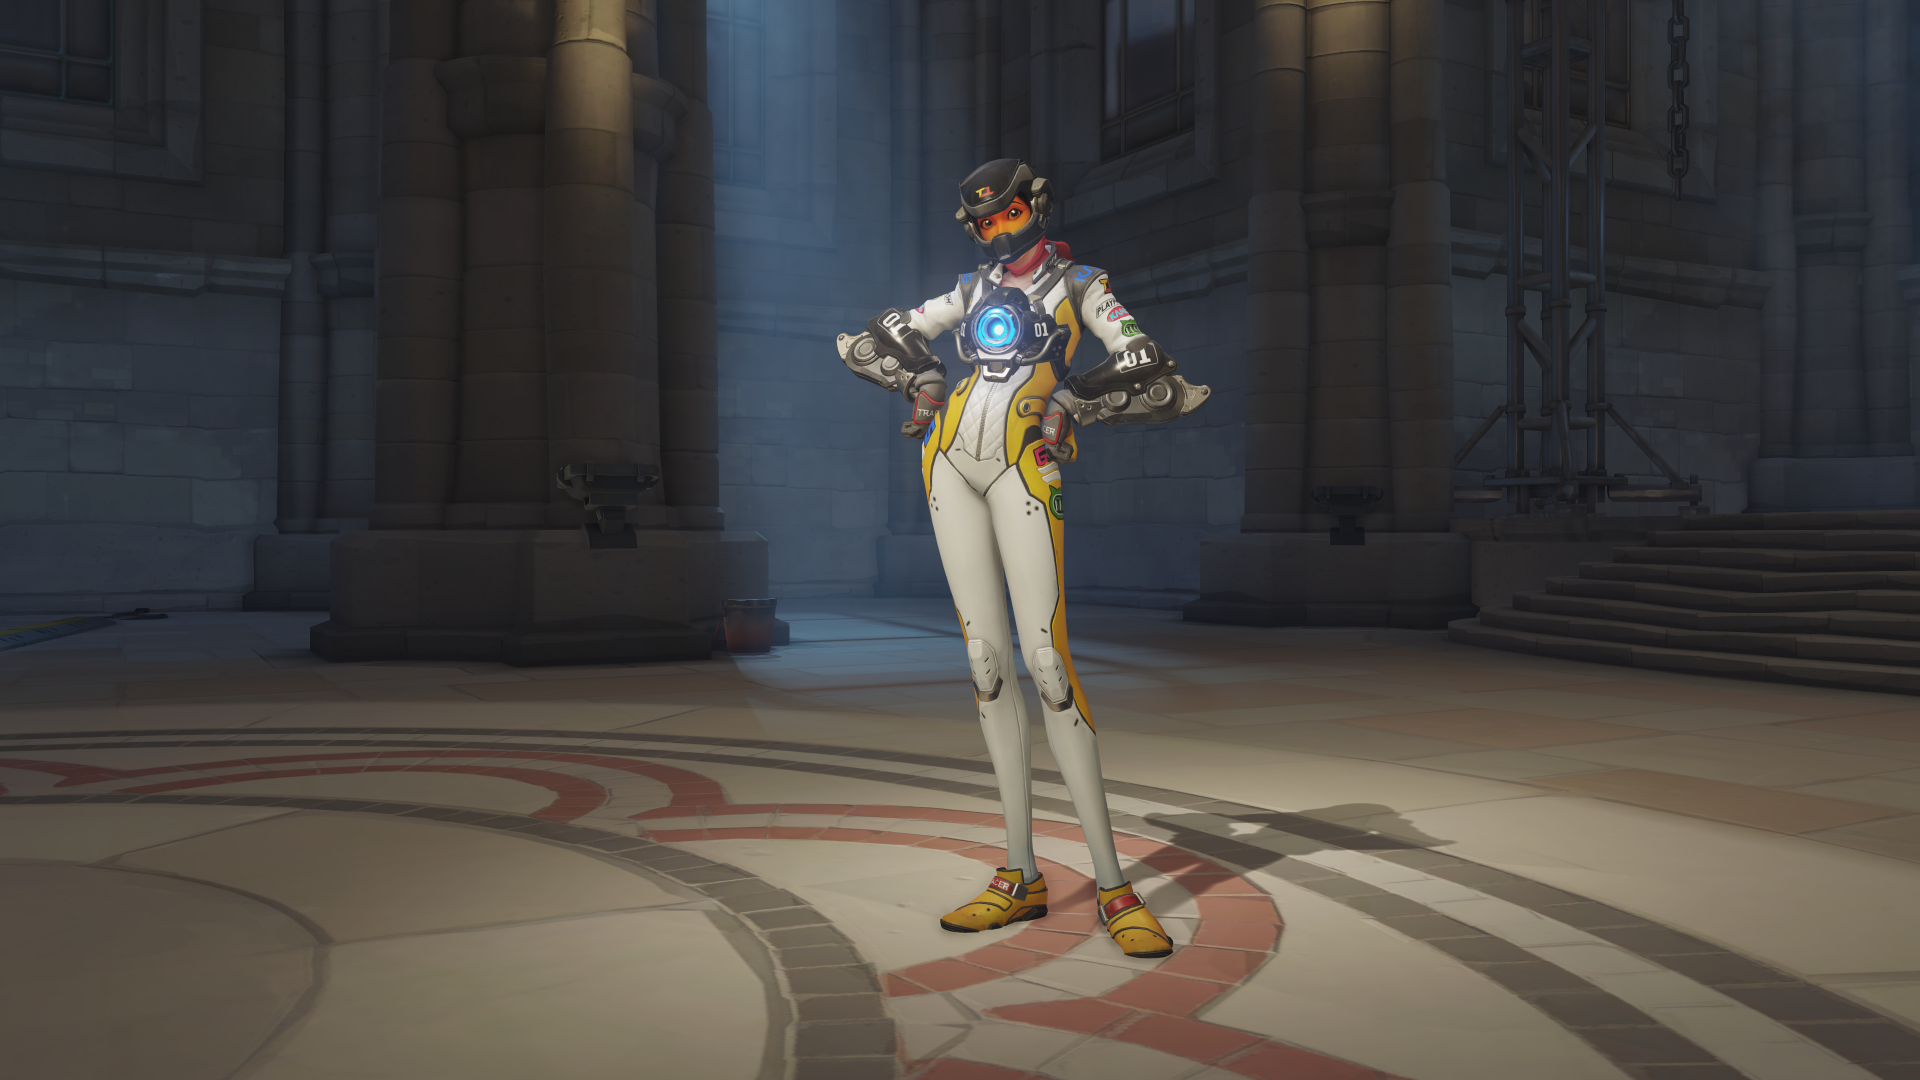 Tracer (Overwatch), Cosplay Reference Wiki